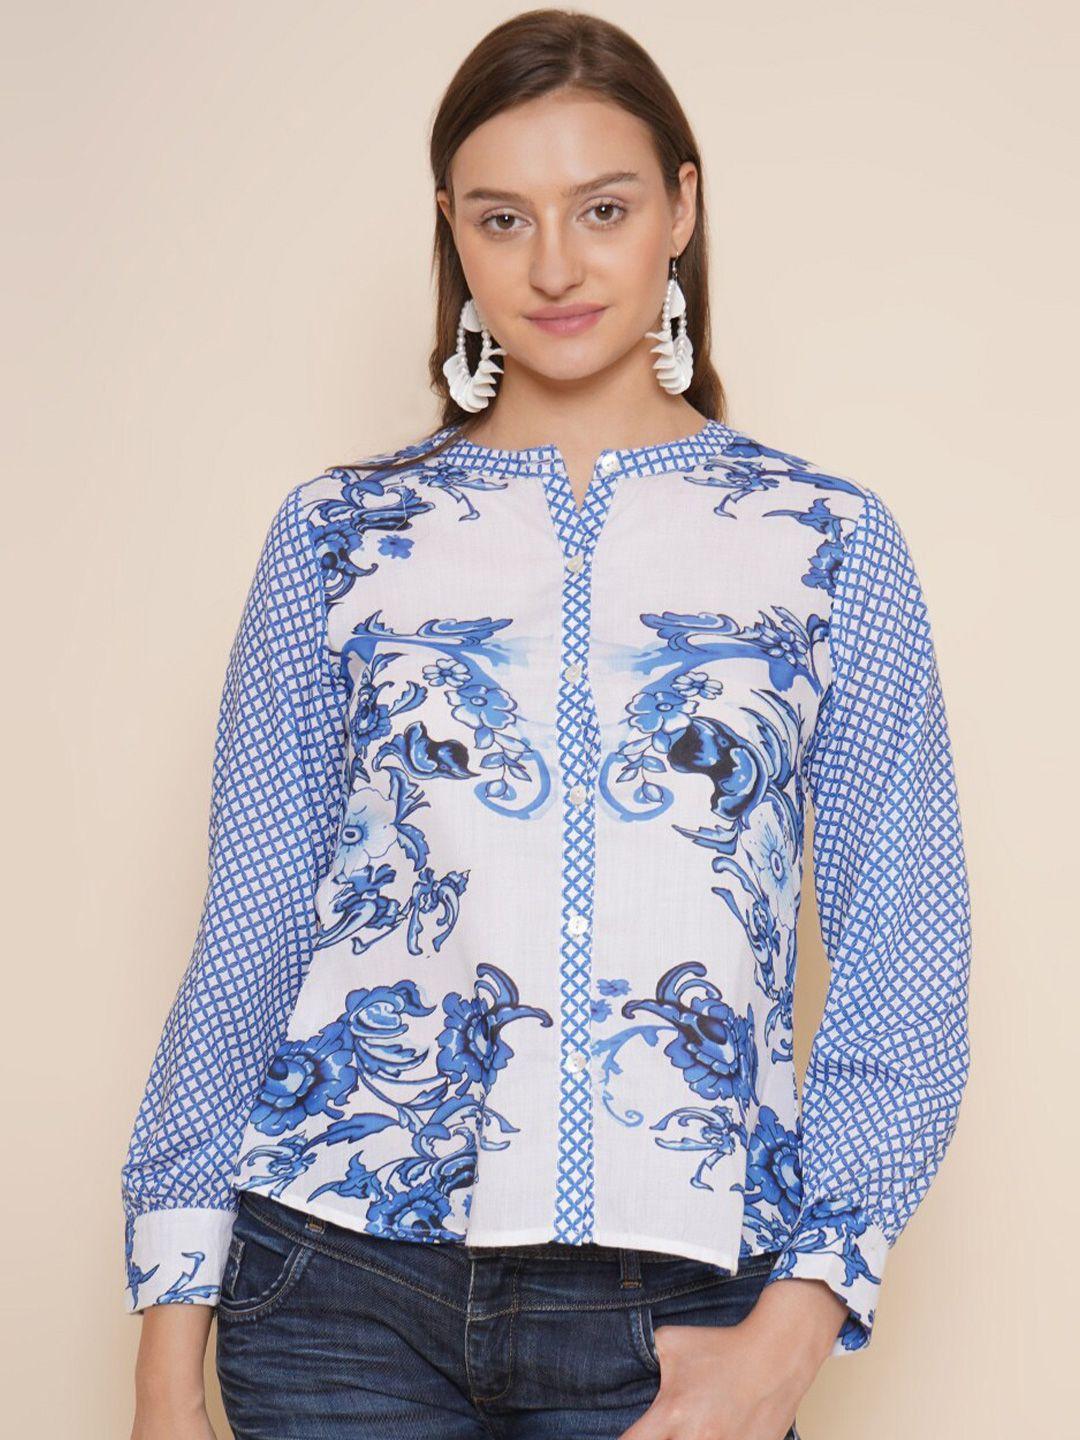 bhama couture blue floral printed band collar shirt style top